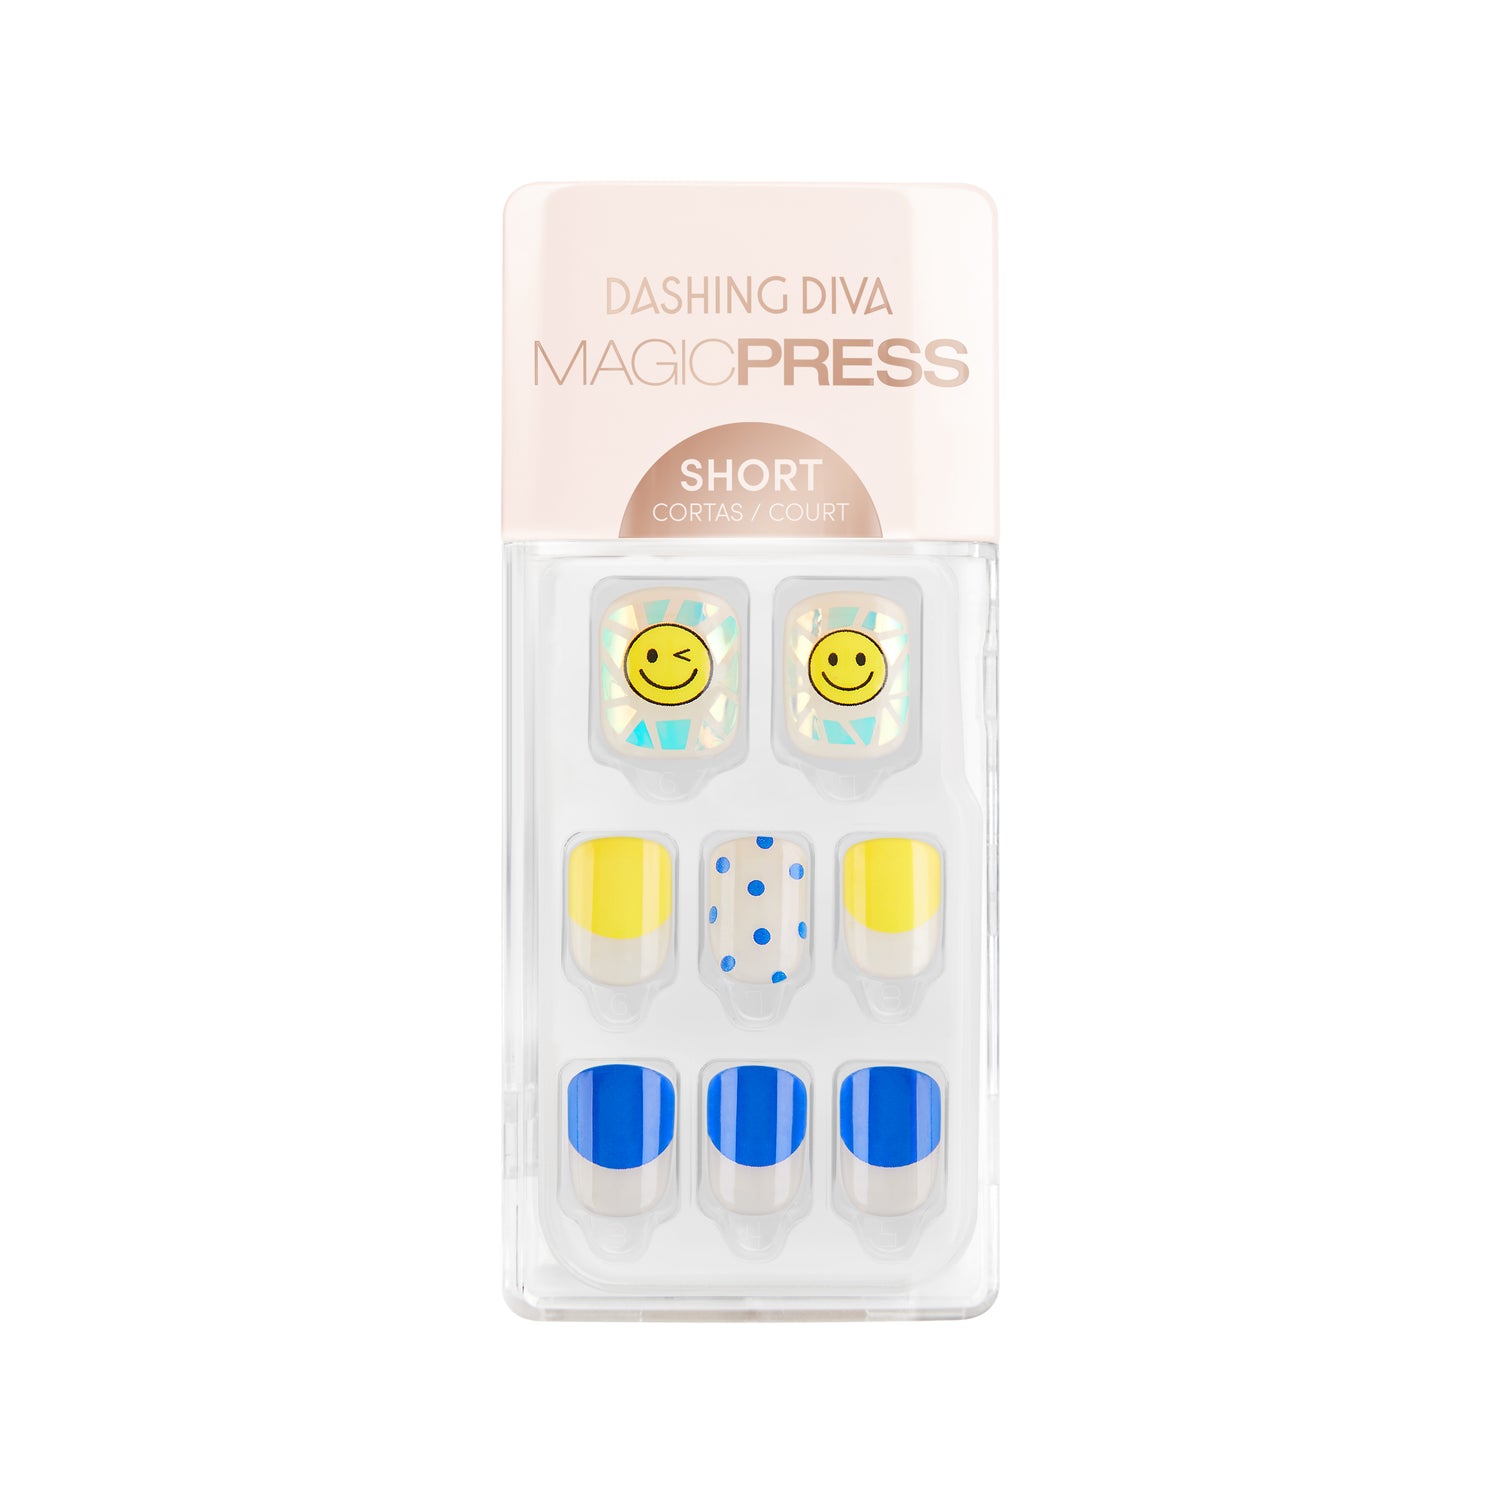 Dashing Diva MAGIC PRESS short, square clear press on gel nails with blue & yellow abstract french tips, and holographic smiley accents.